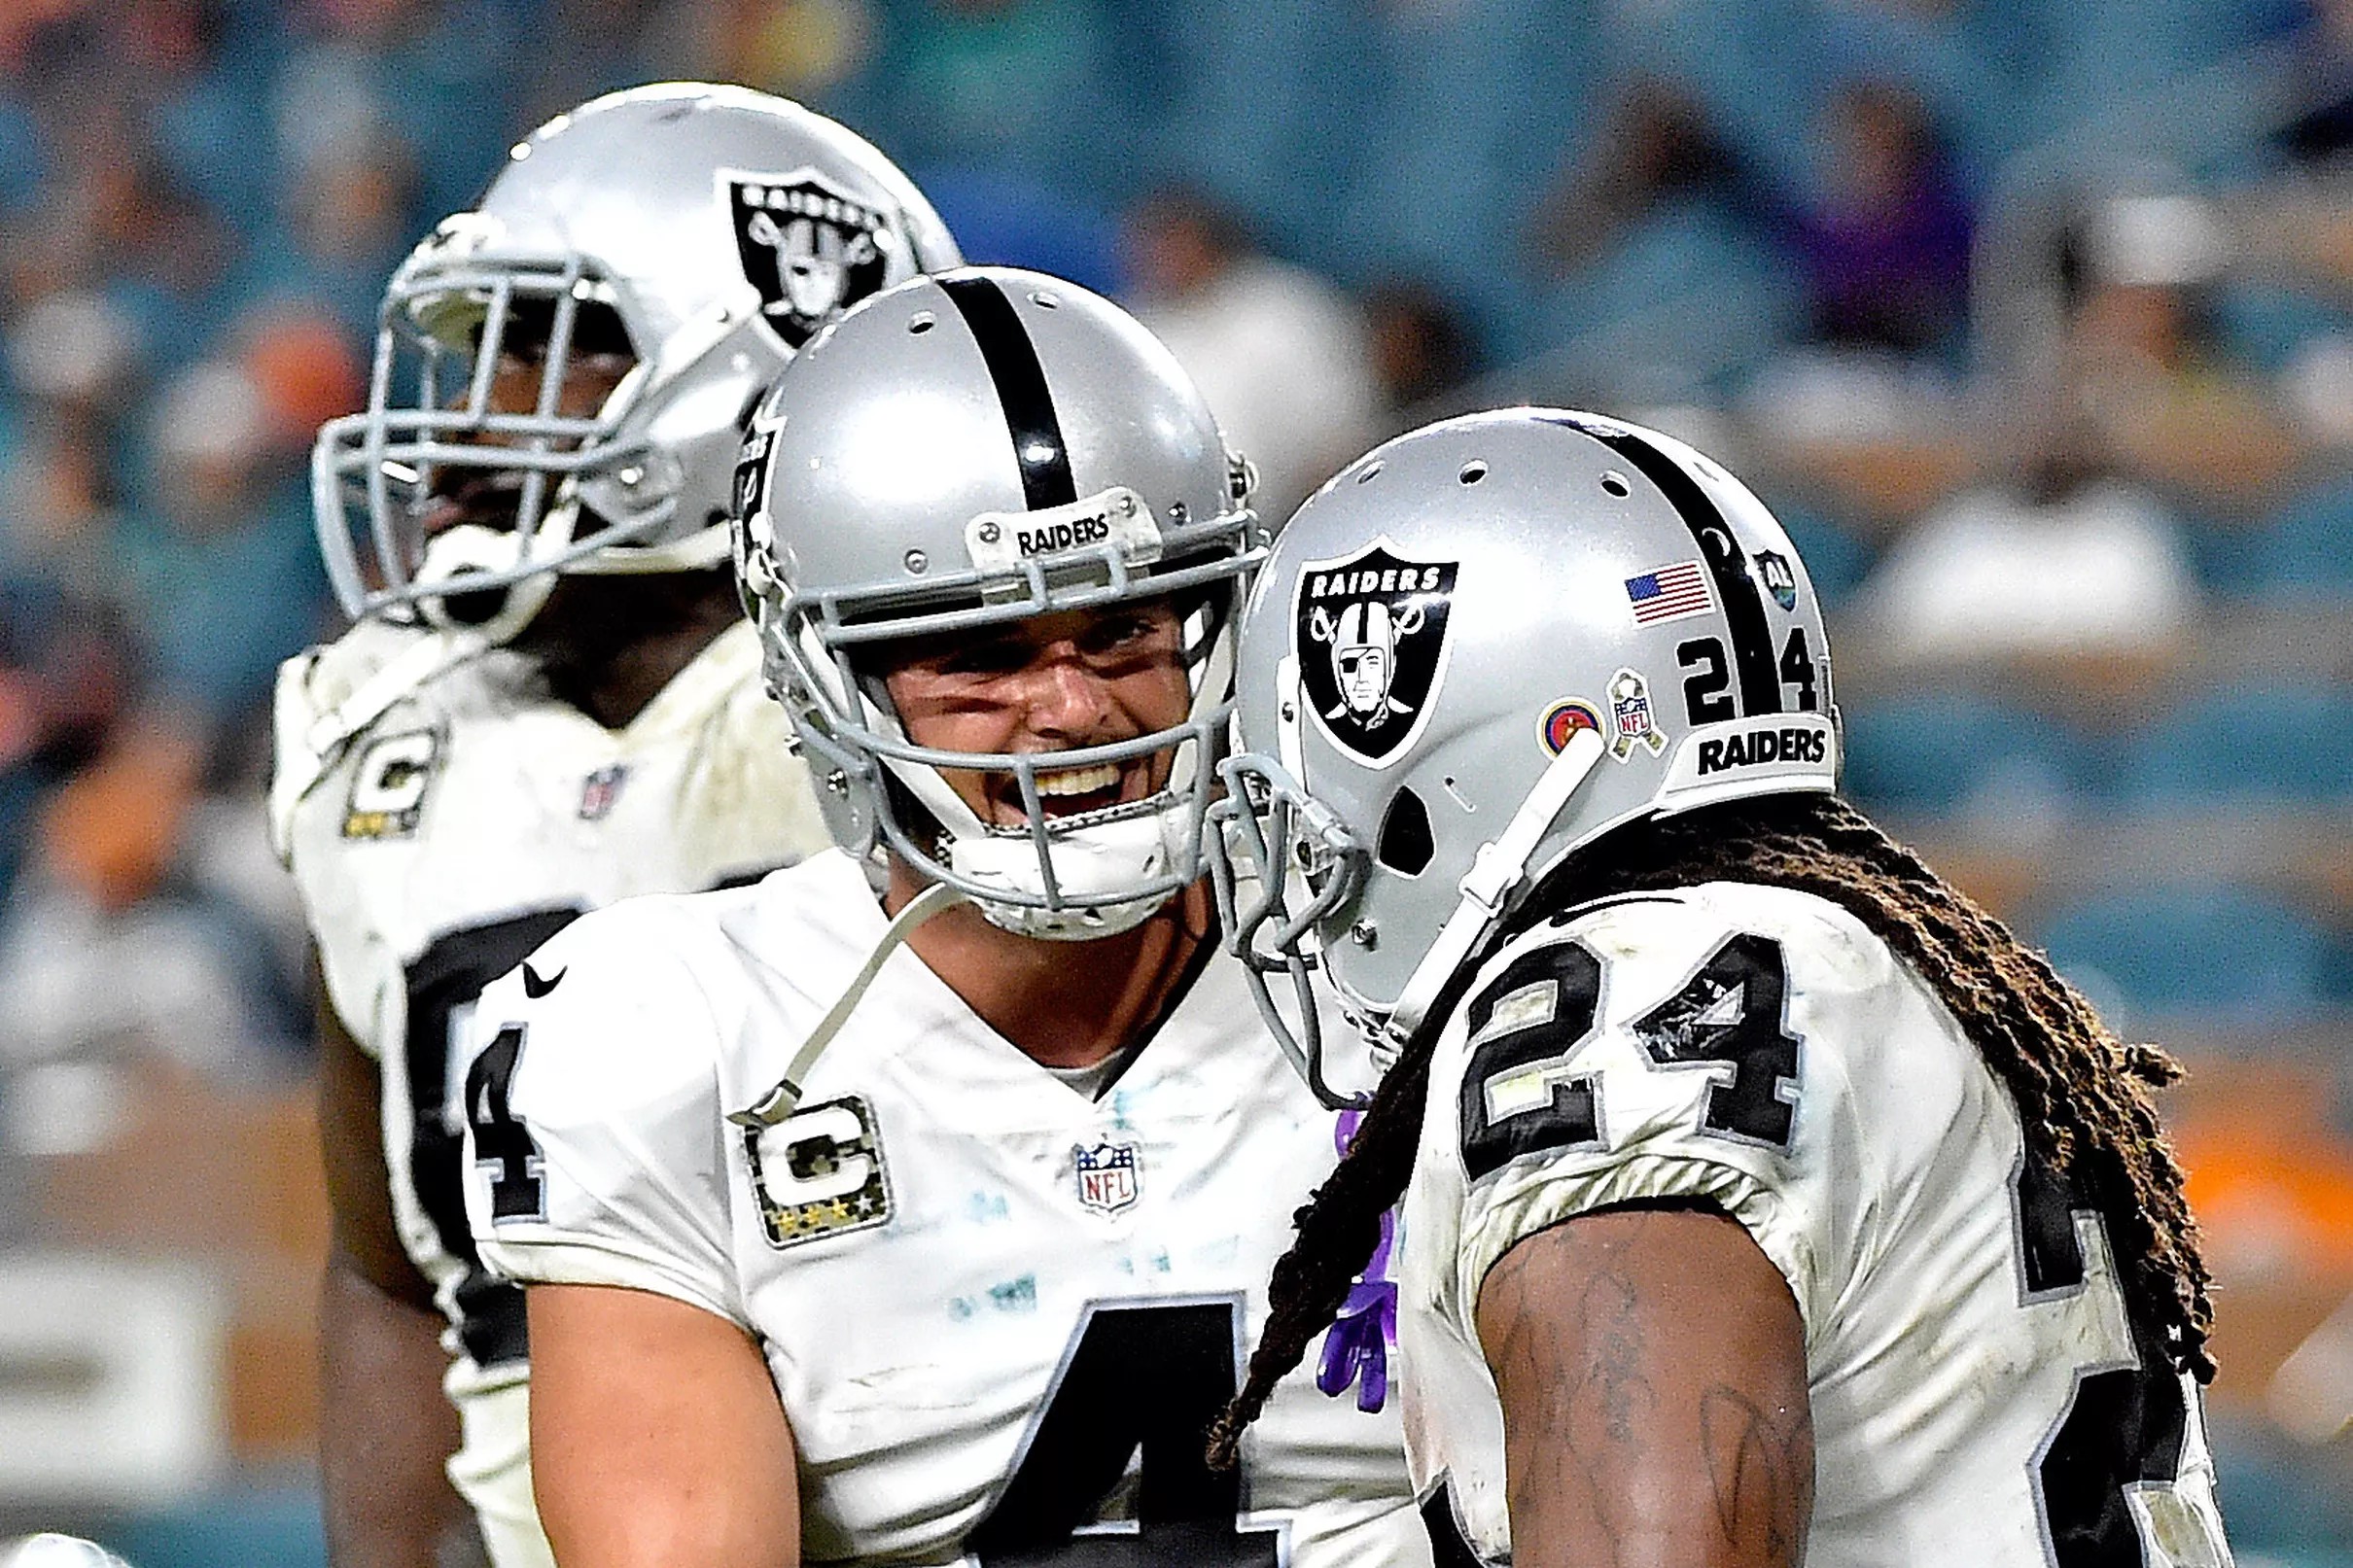 Raiders win big in AFC playoff race over the bye